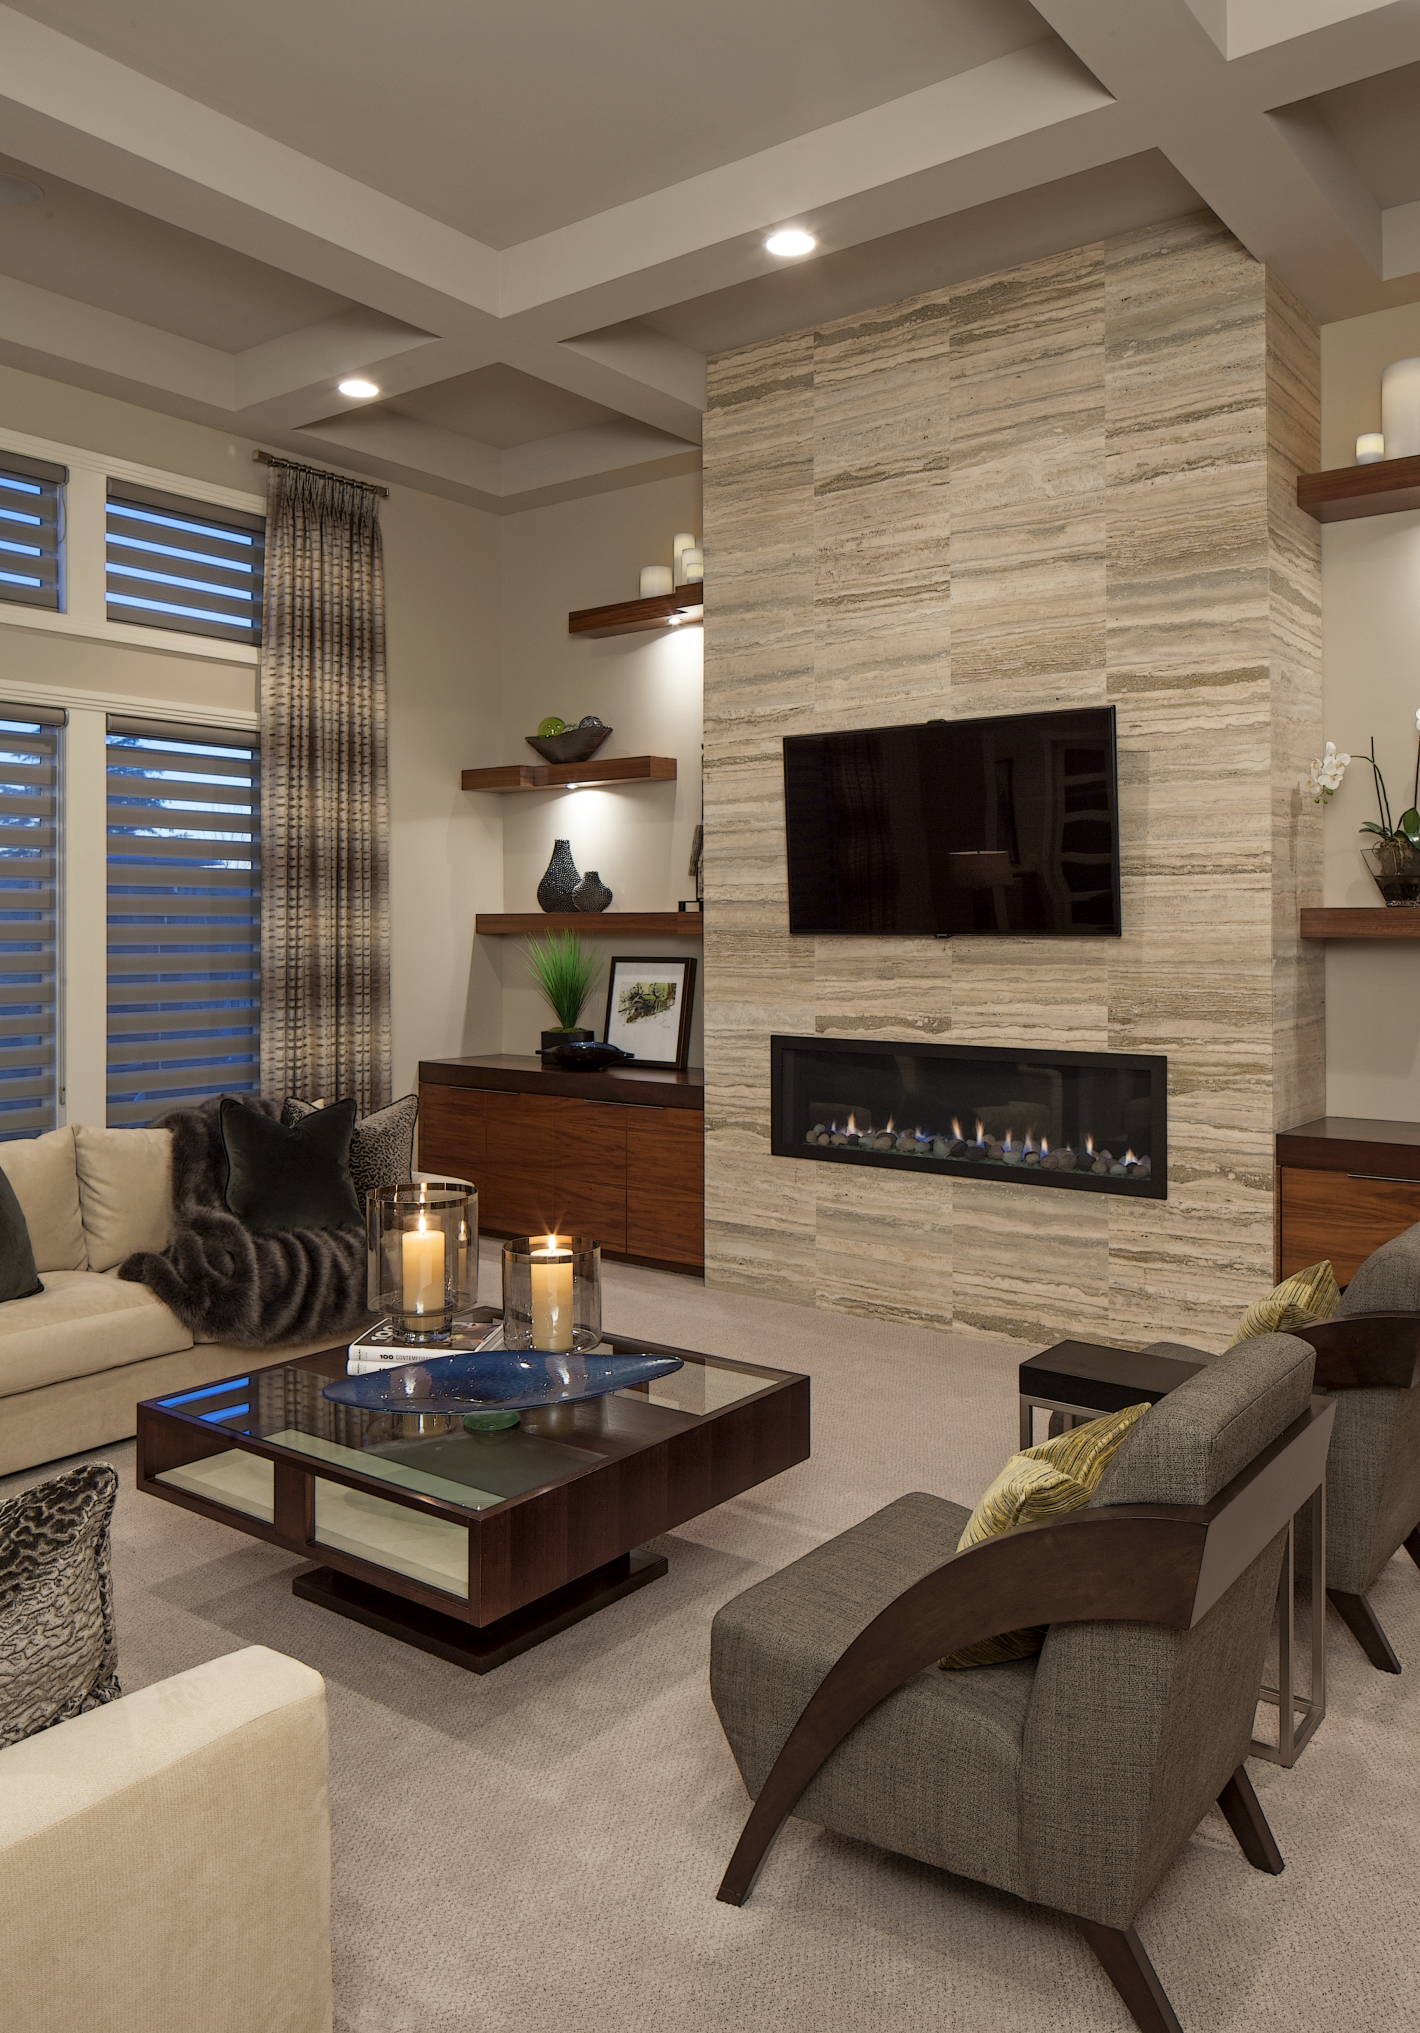 75 Brown Living Room Ideas You Ll Love